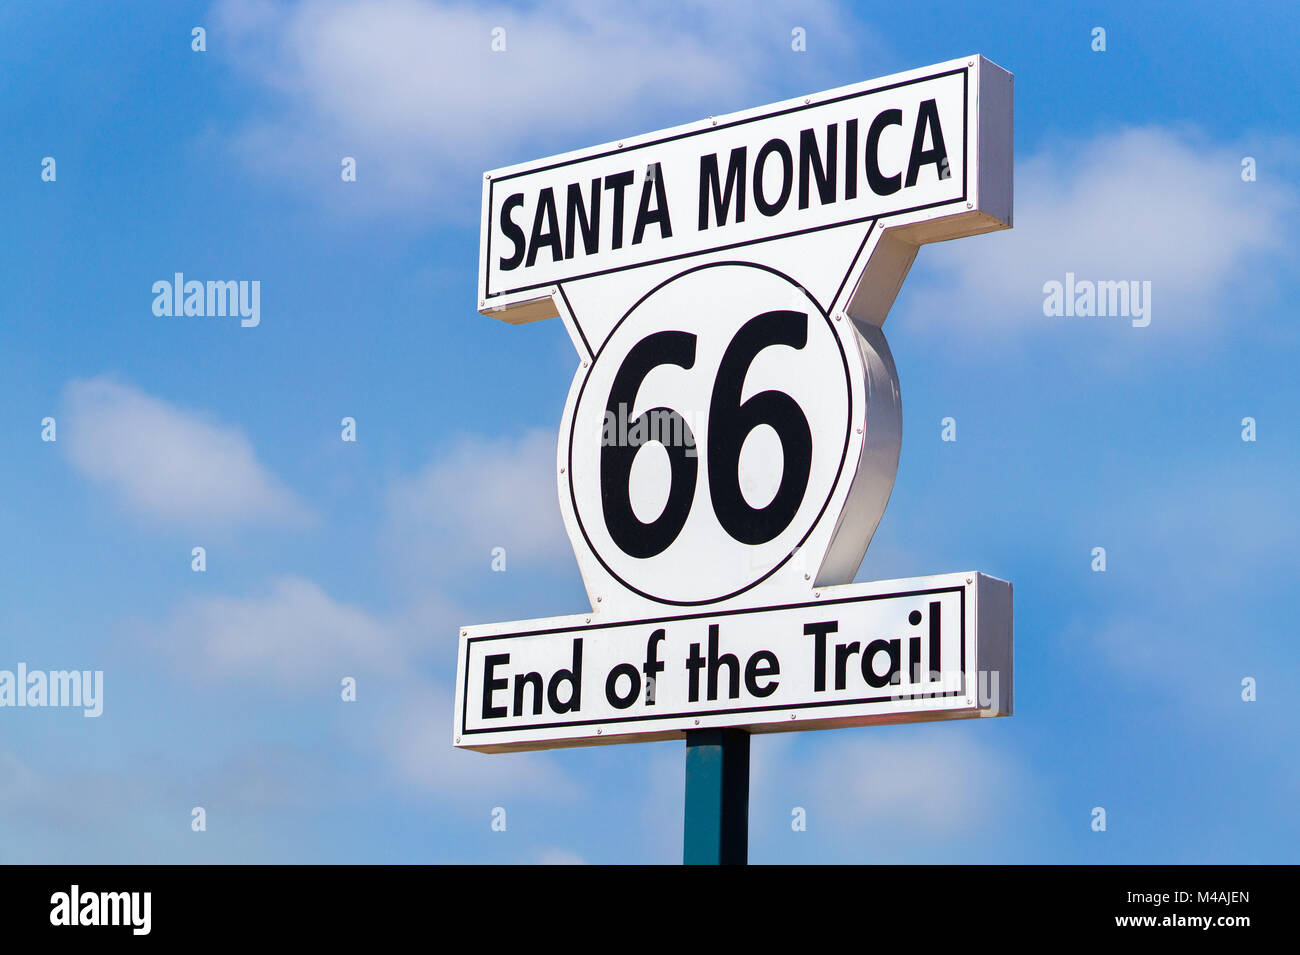 Santa Monica End of the Trail sign against sky. Stock Photo